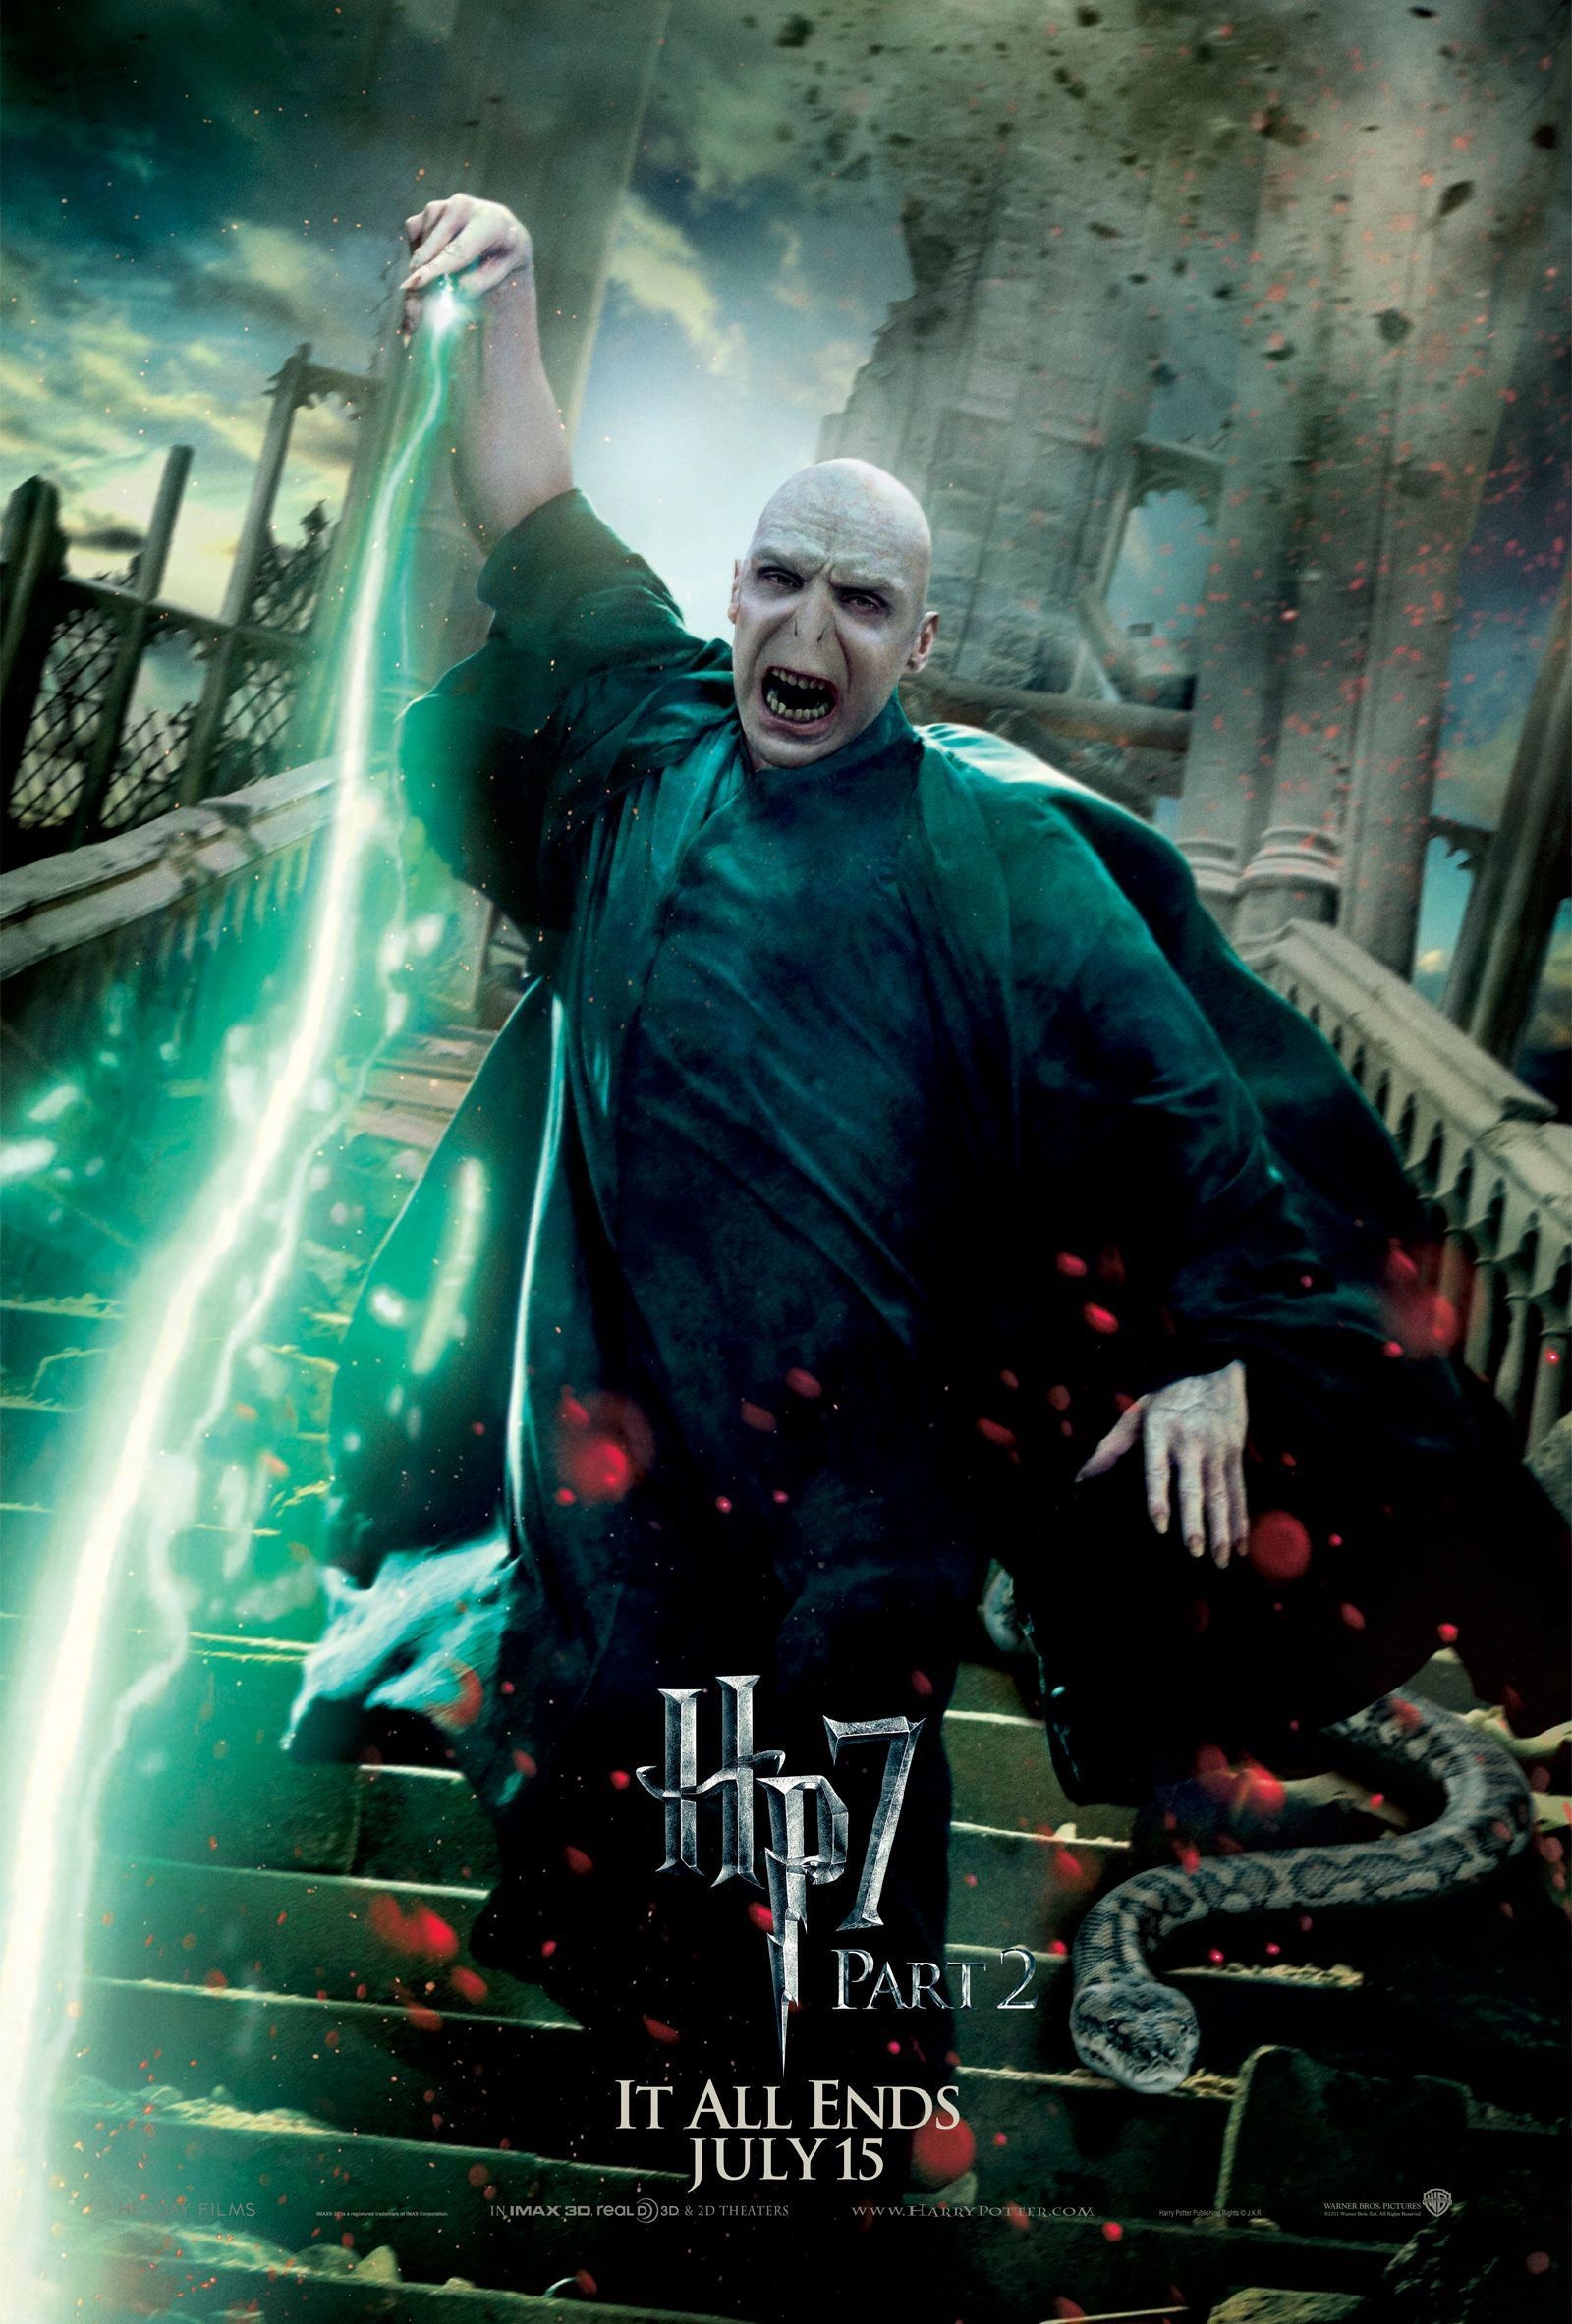 1600x2366 Harry Potter images Deathly Hallows Part 2 Action Poster: Lord Voldemort  [HQ] HD wallpaper and background photos